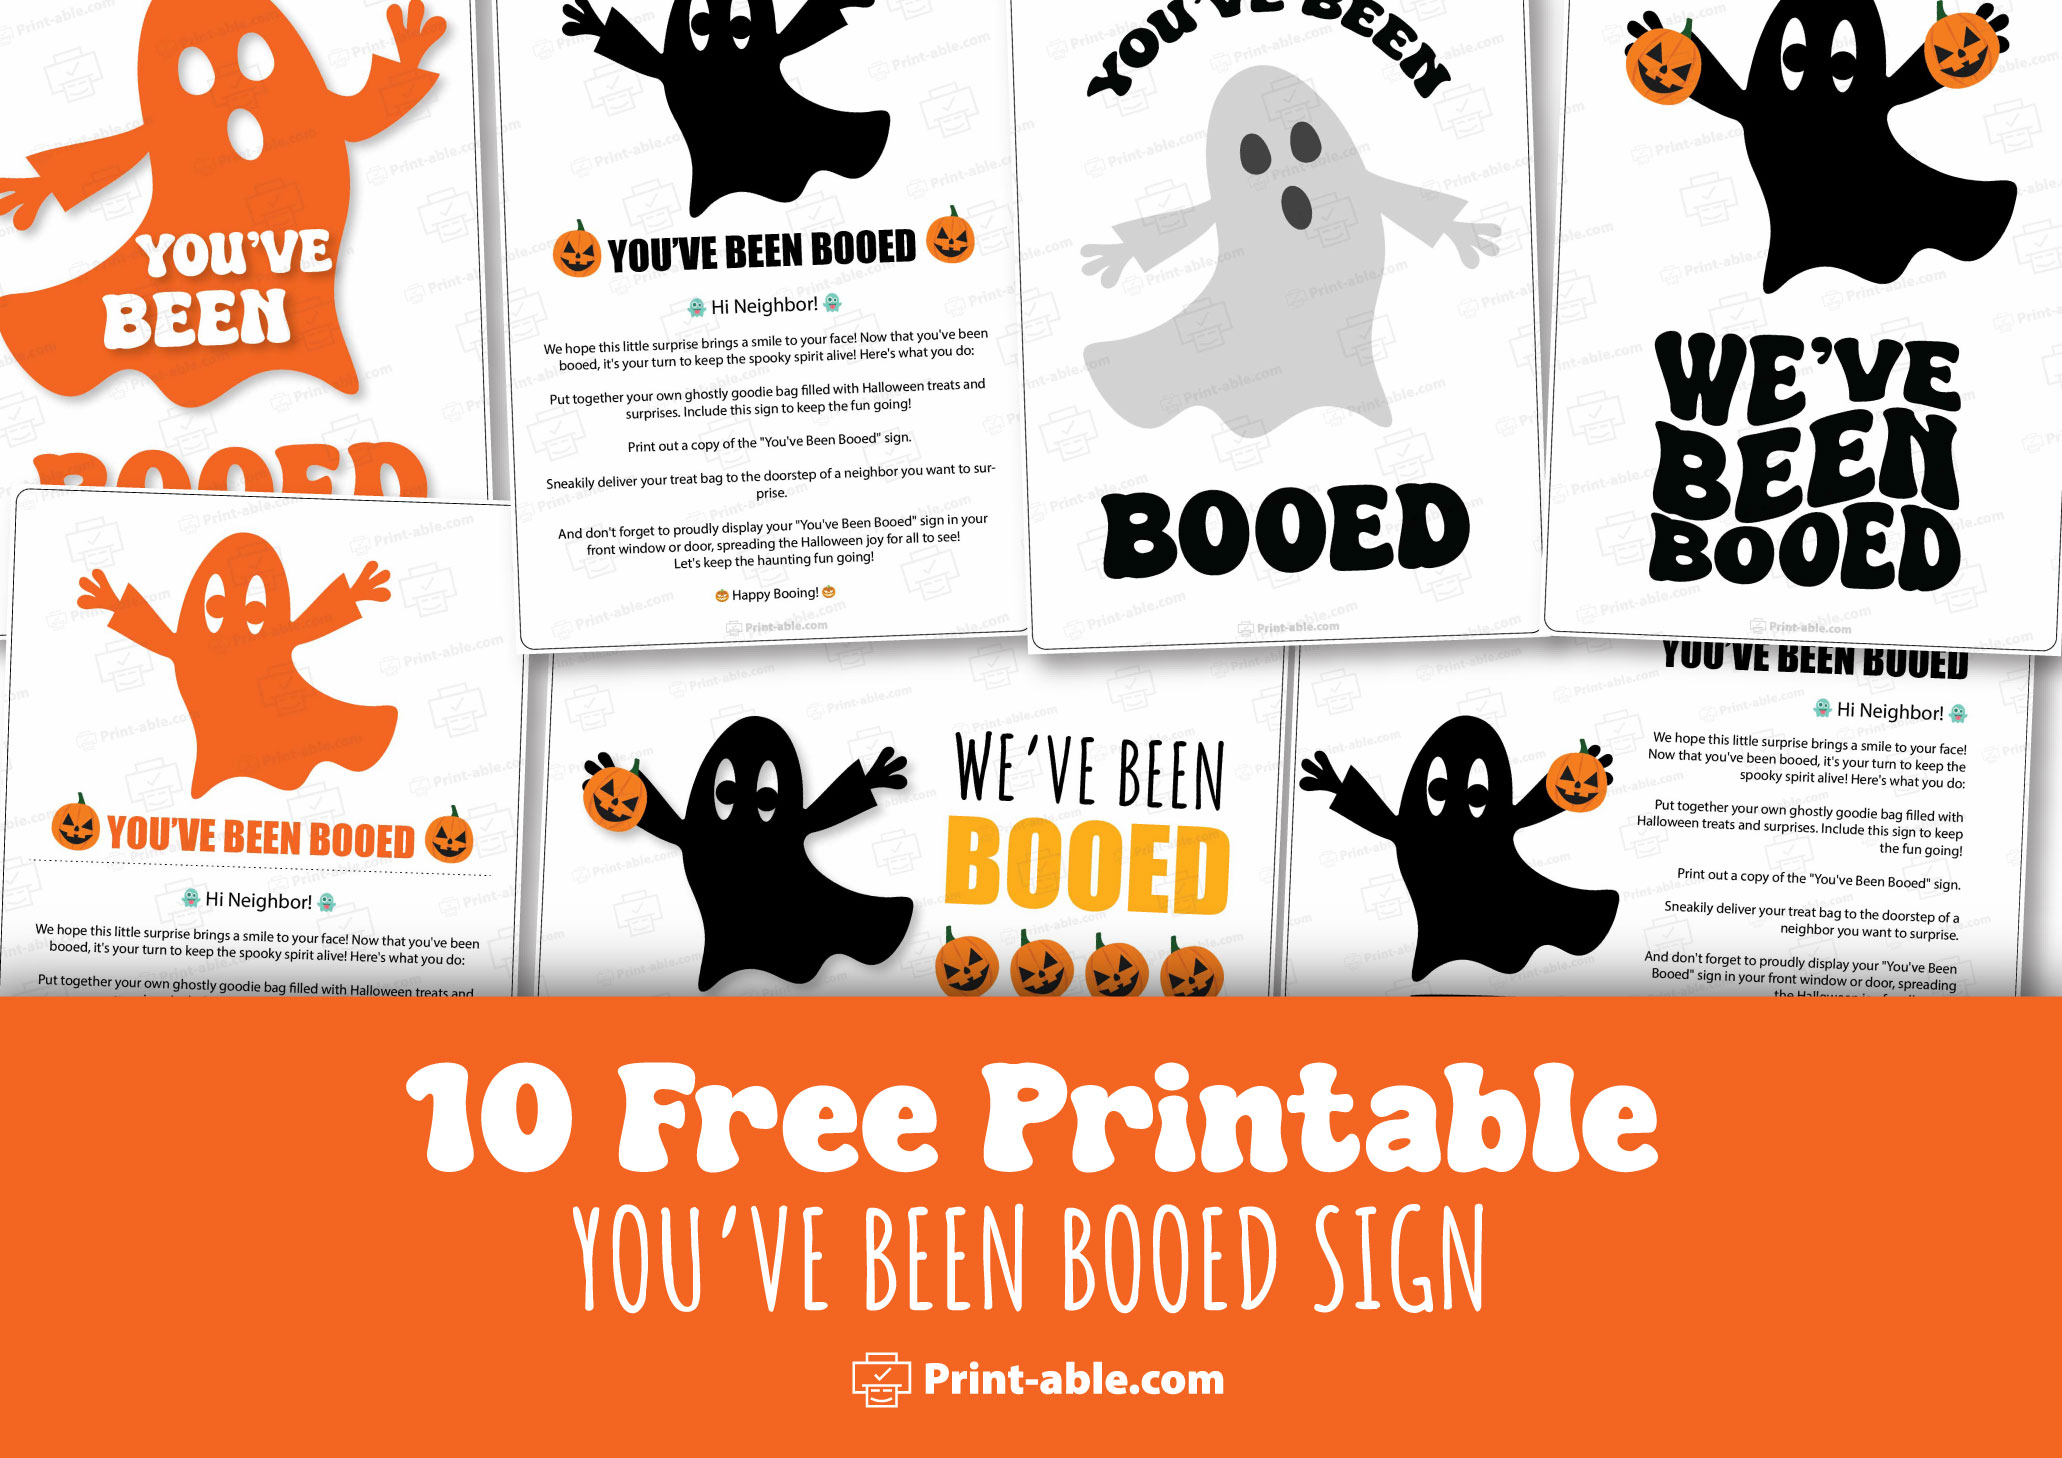 You've Been Booed Printable Free Download